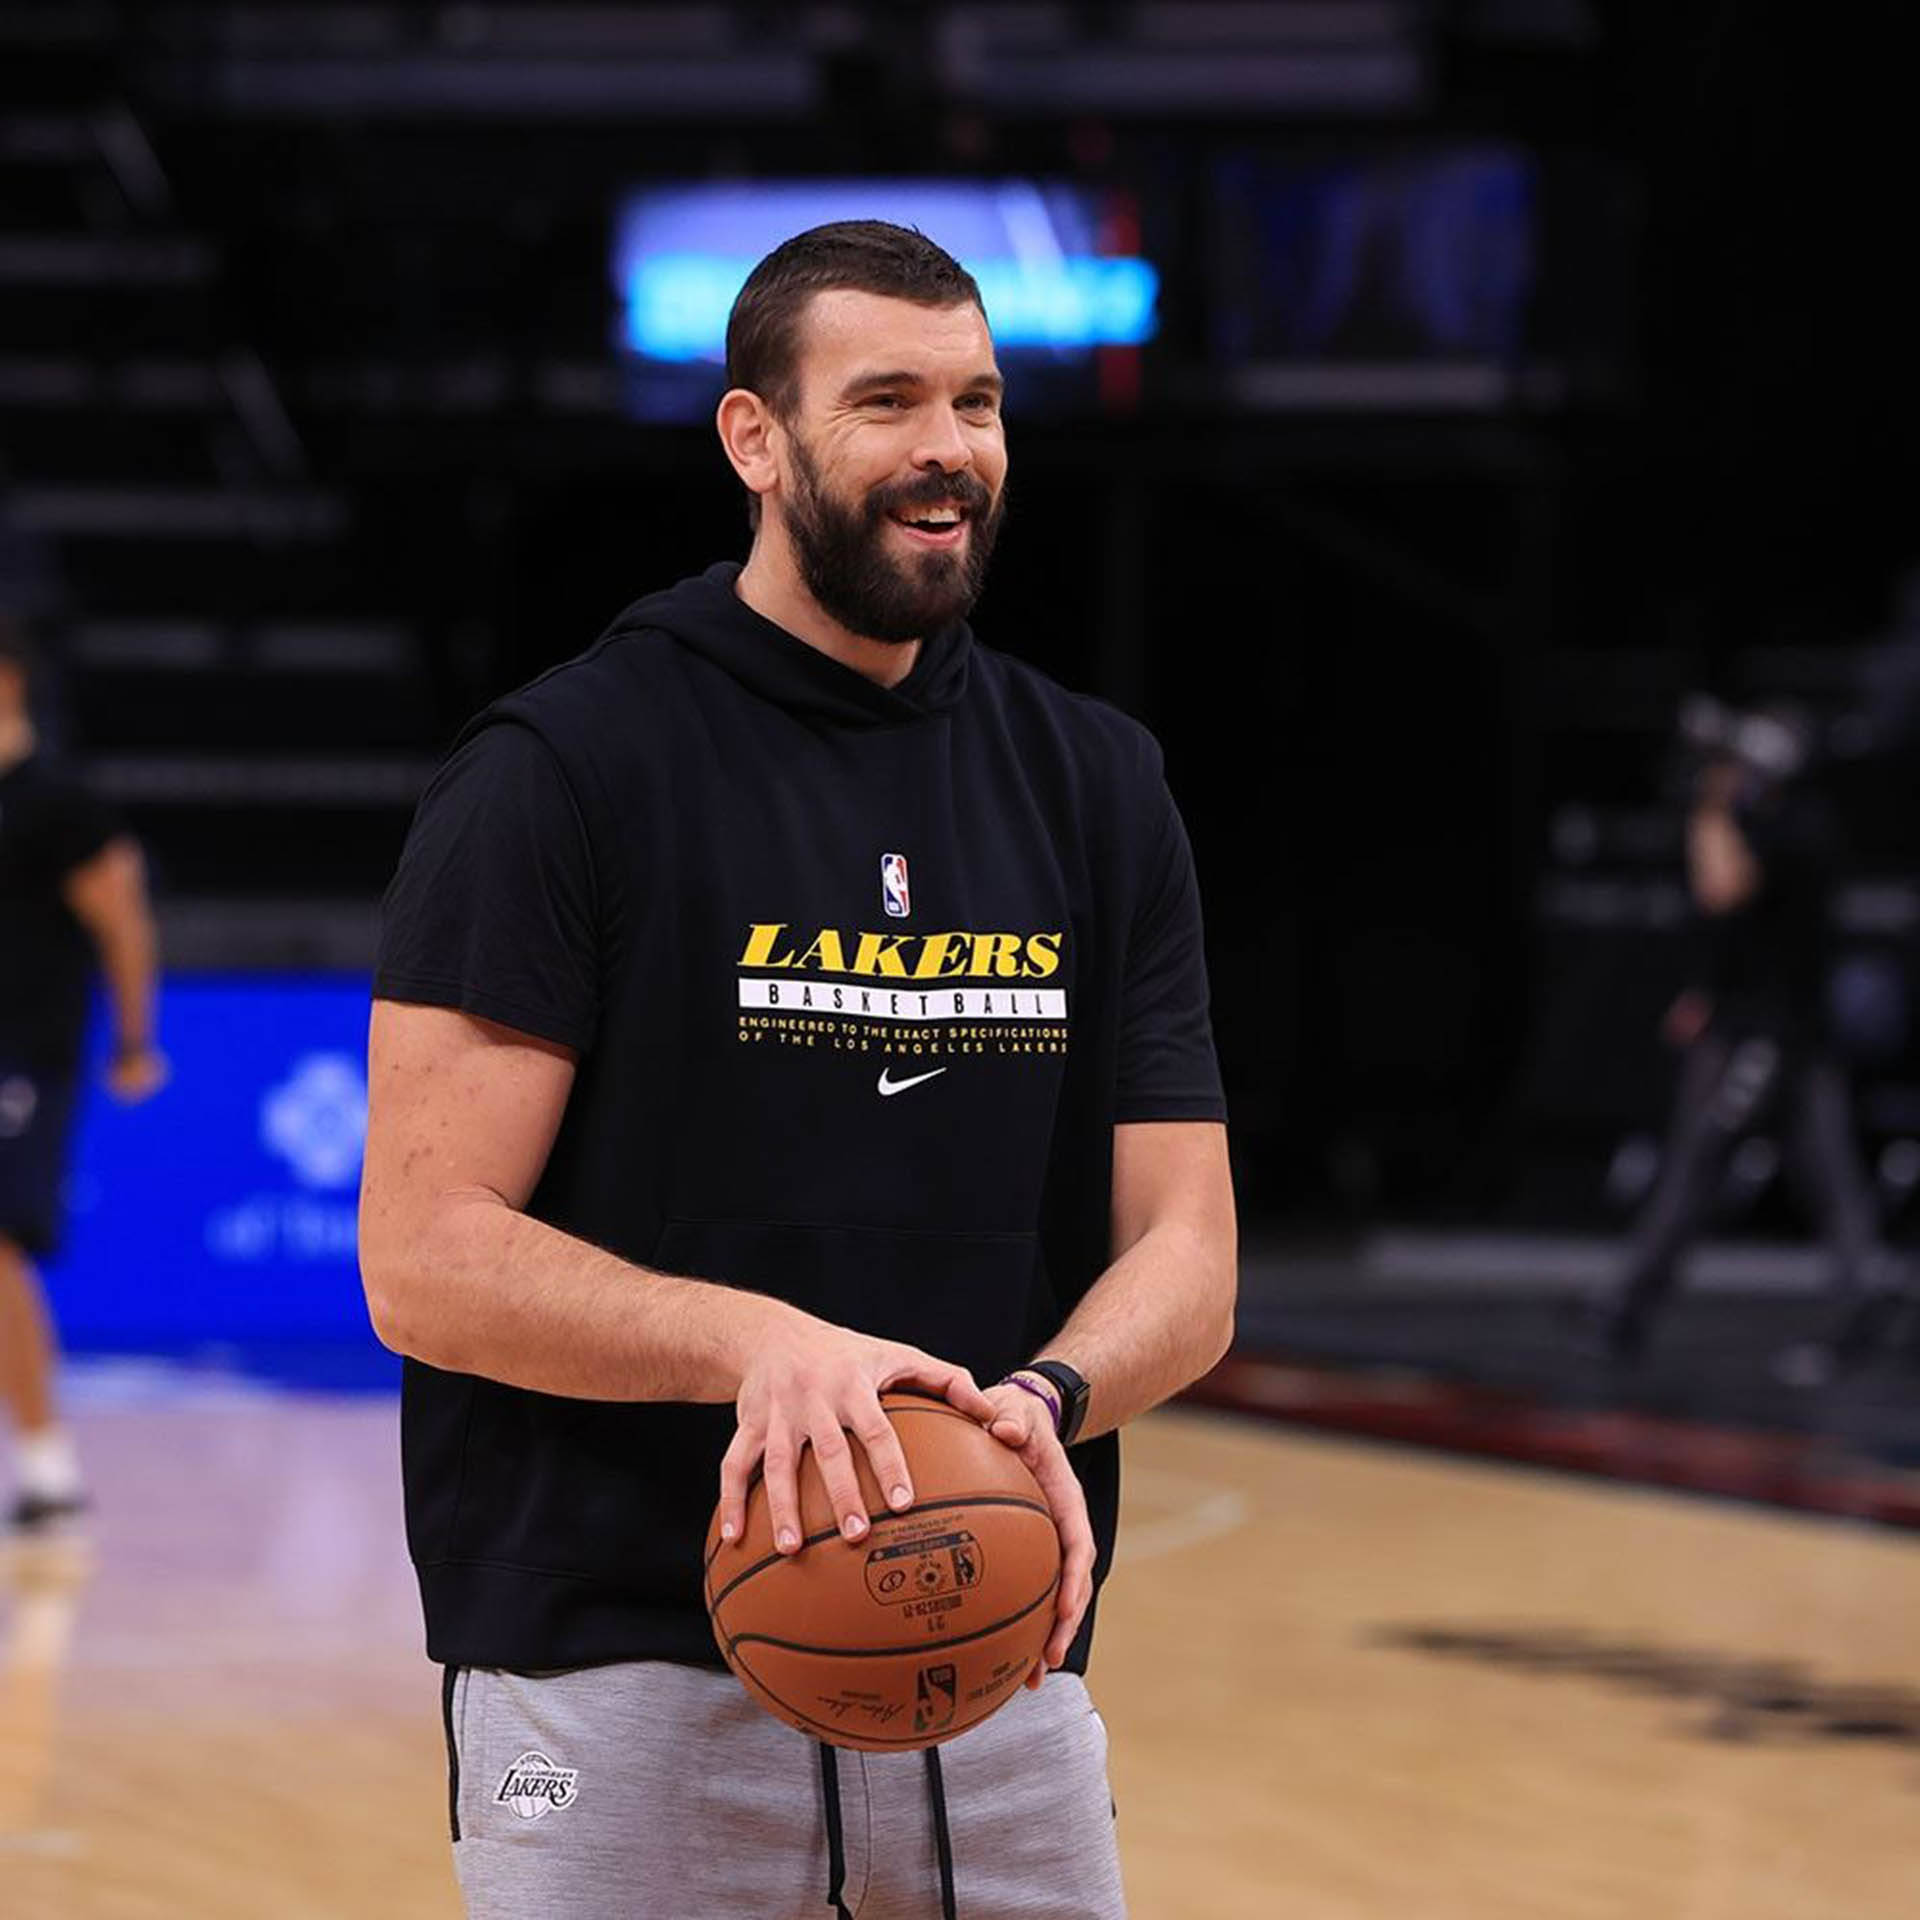 Lakers Center, Marc Gasol seen warming up before a game. Wallpaper